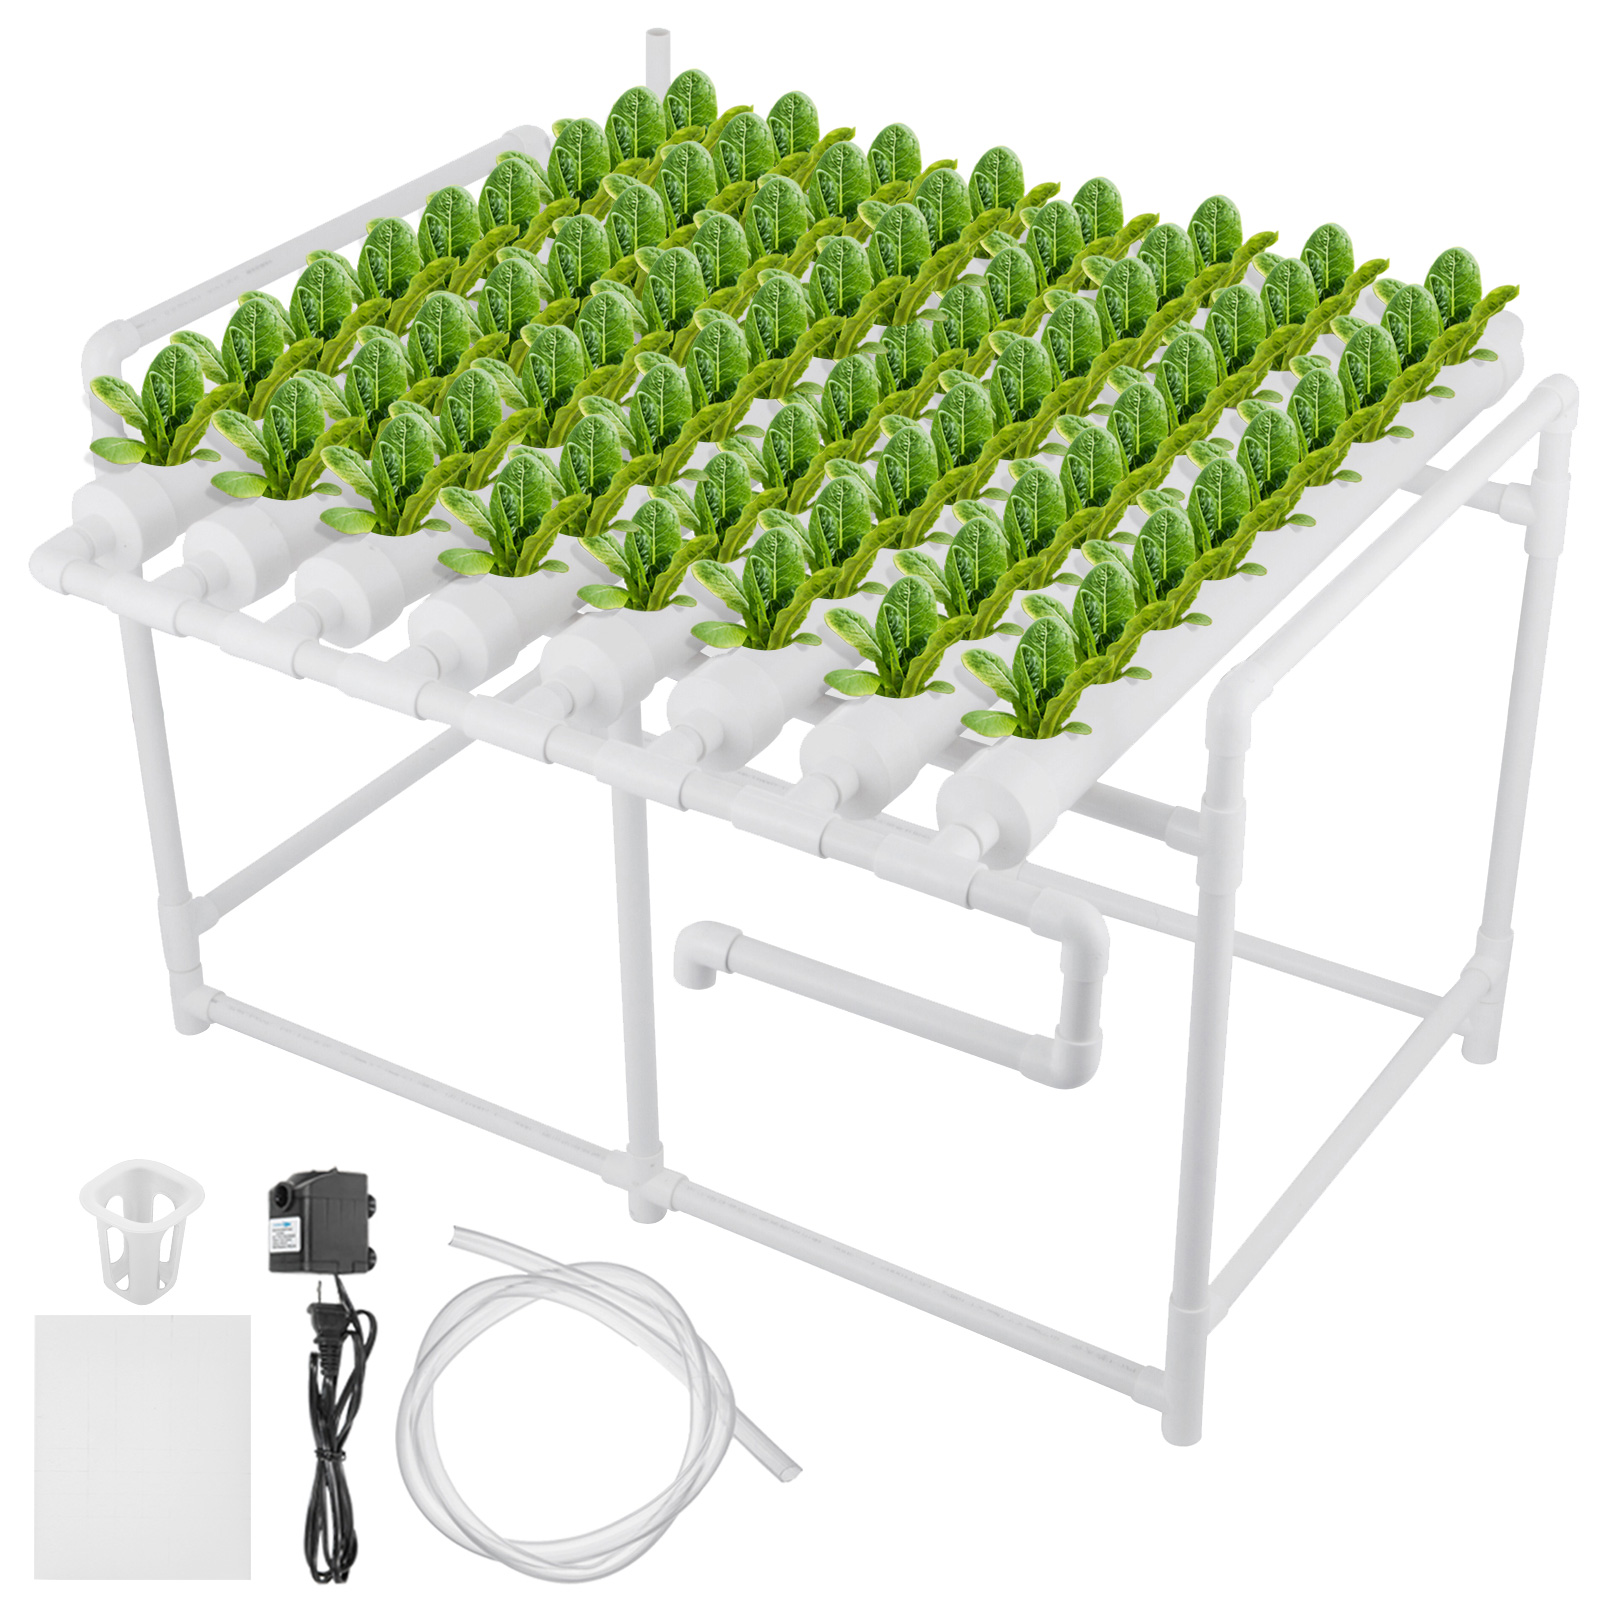 Sidasu Hydroponic Grow Kit 108 Sites 12 Pipes Hydroponic Planting Equipment Ebb and Flow Deep Water Culture Balcony Garden System Vegetable Tool Grow Kits 